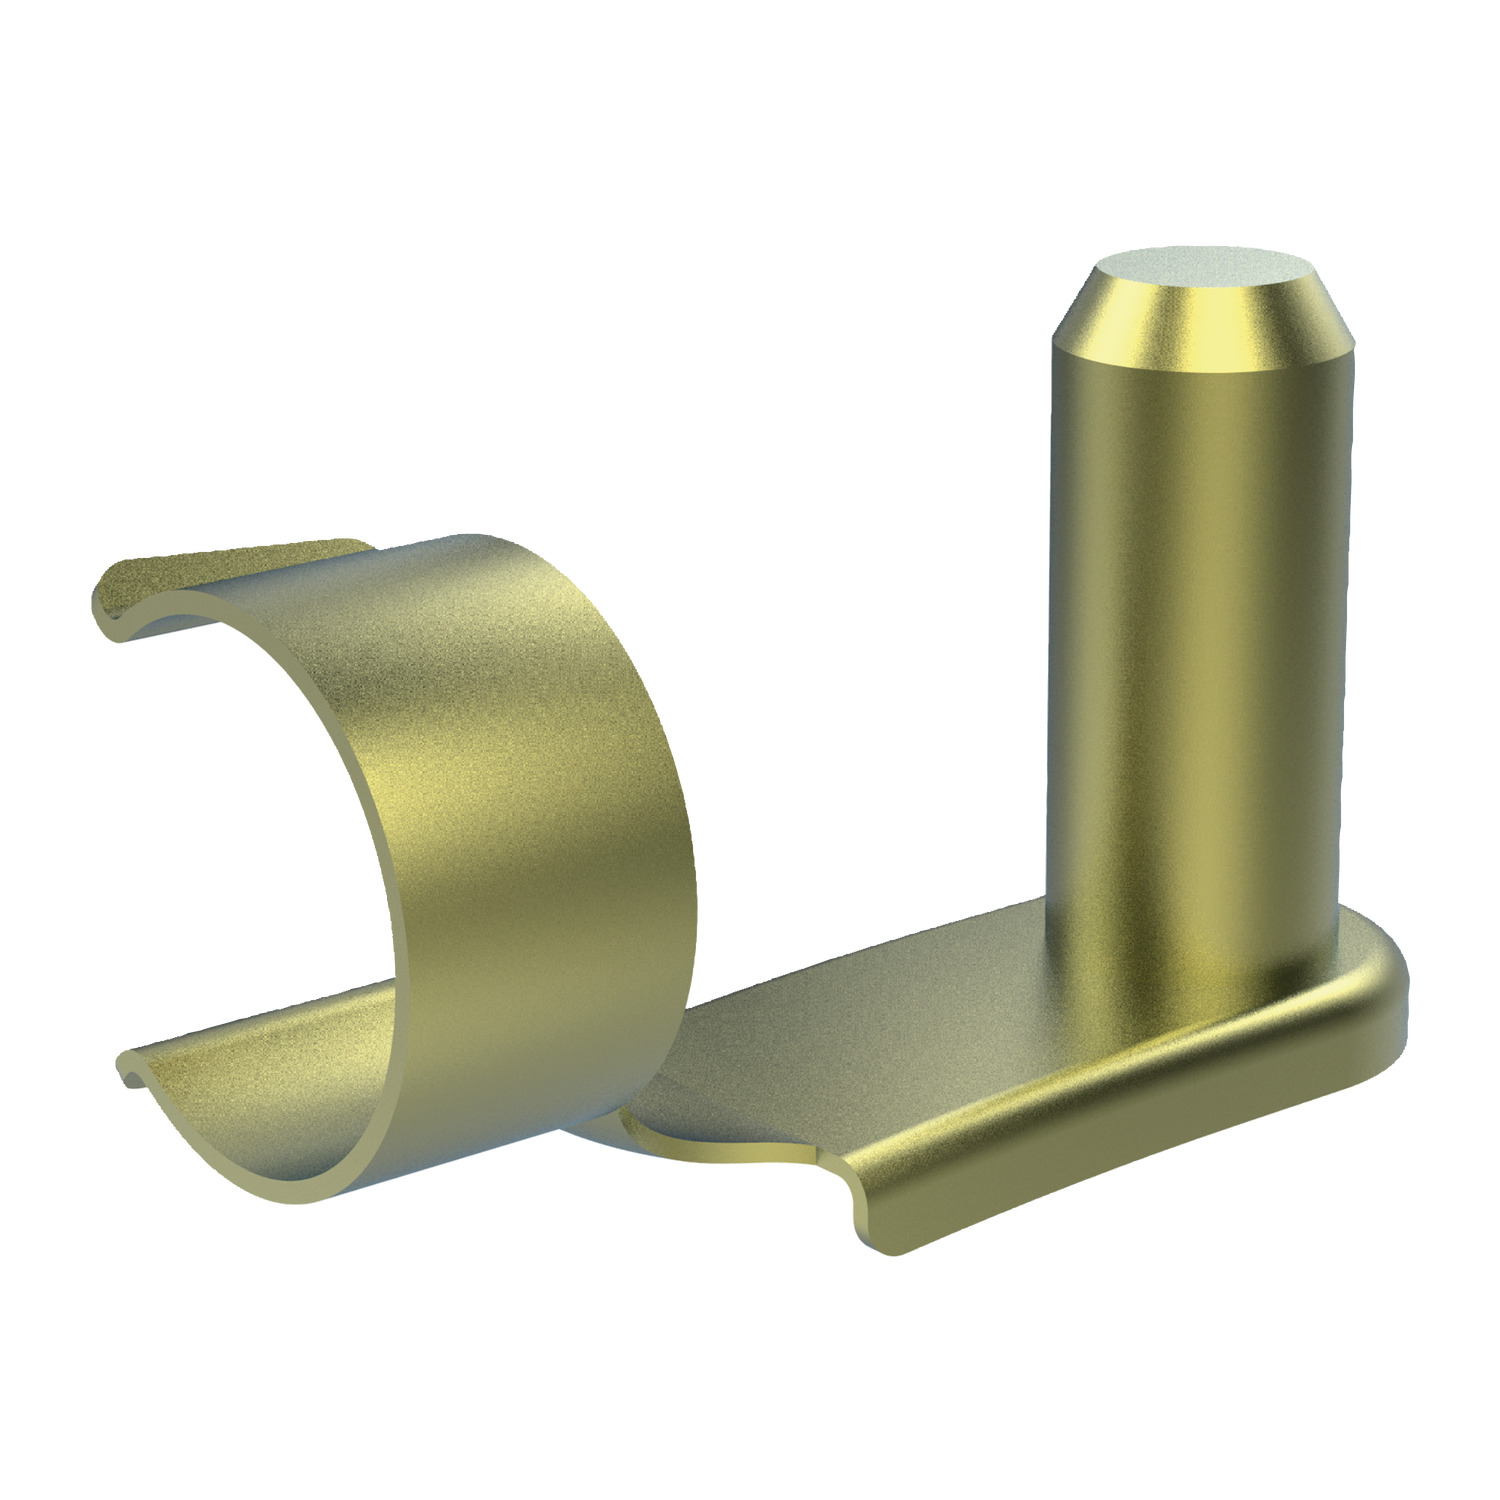 Clevis Retention Clips - Imperial Yellow zinc-plated retention clips. For use with clevis joints R3393 and R3394.